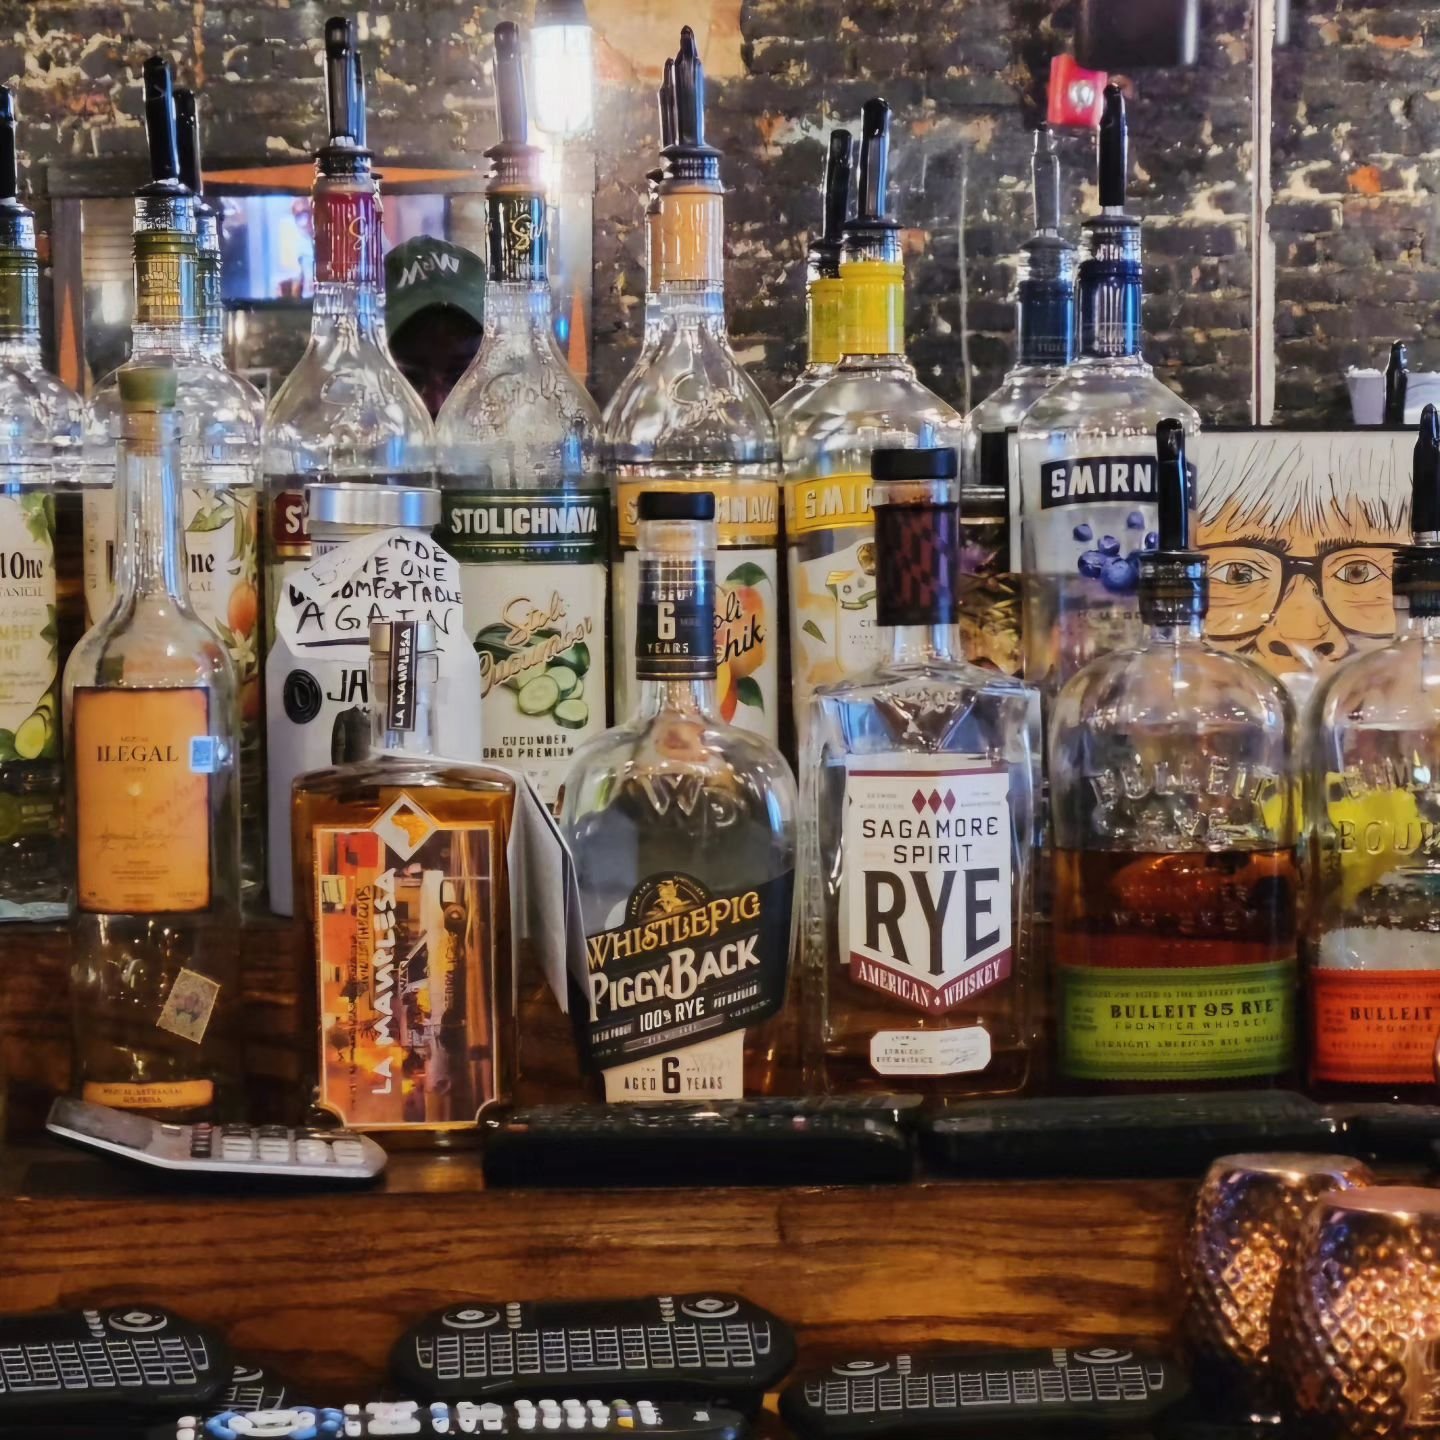 🔎 I spy with my little eye a bottle of DC's first-ever agave spirit. La Manplesa, aged 16 months in our bourbon barrels, is now behind the bar at @fatpetesbbqofficial in Cleveland Park!

Bonus round: who can spot green-capped co-founder Troy?

#Agav